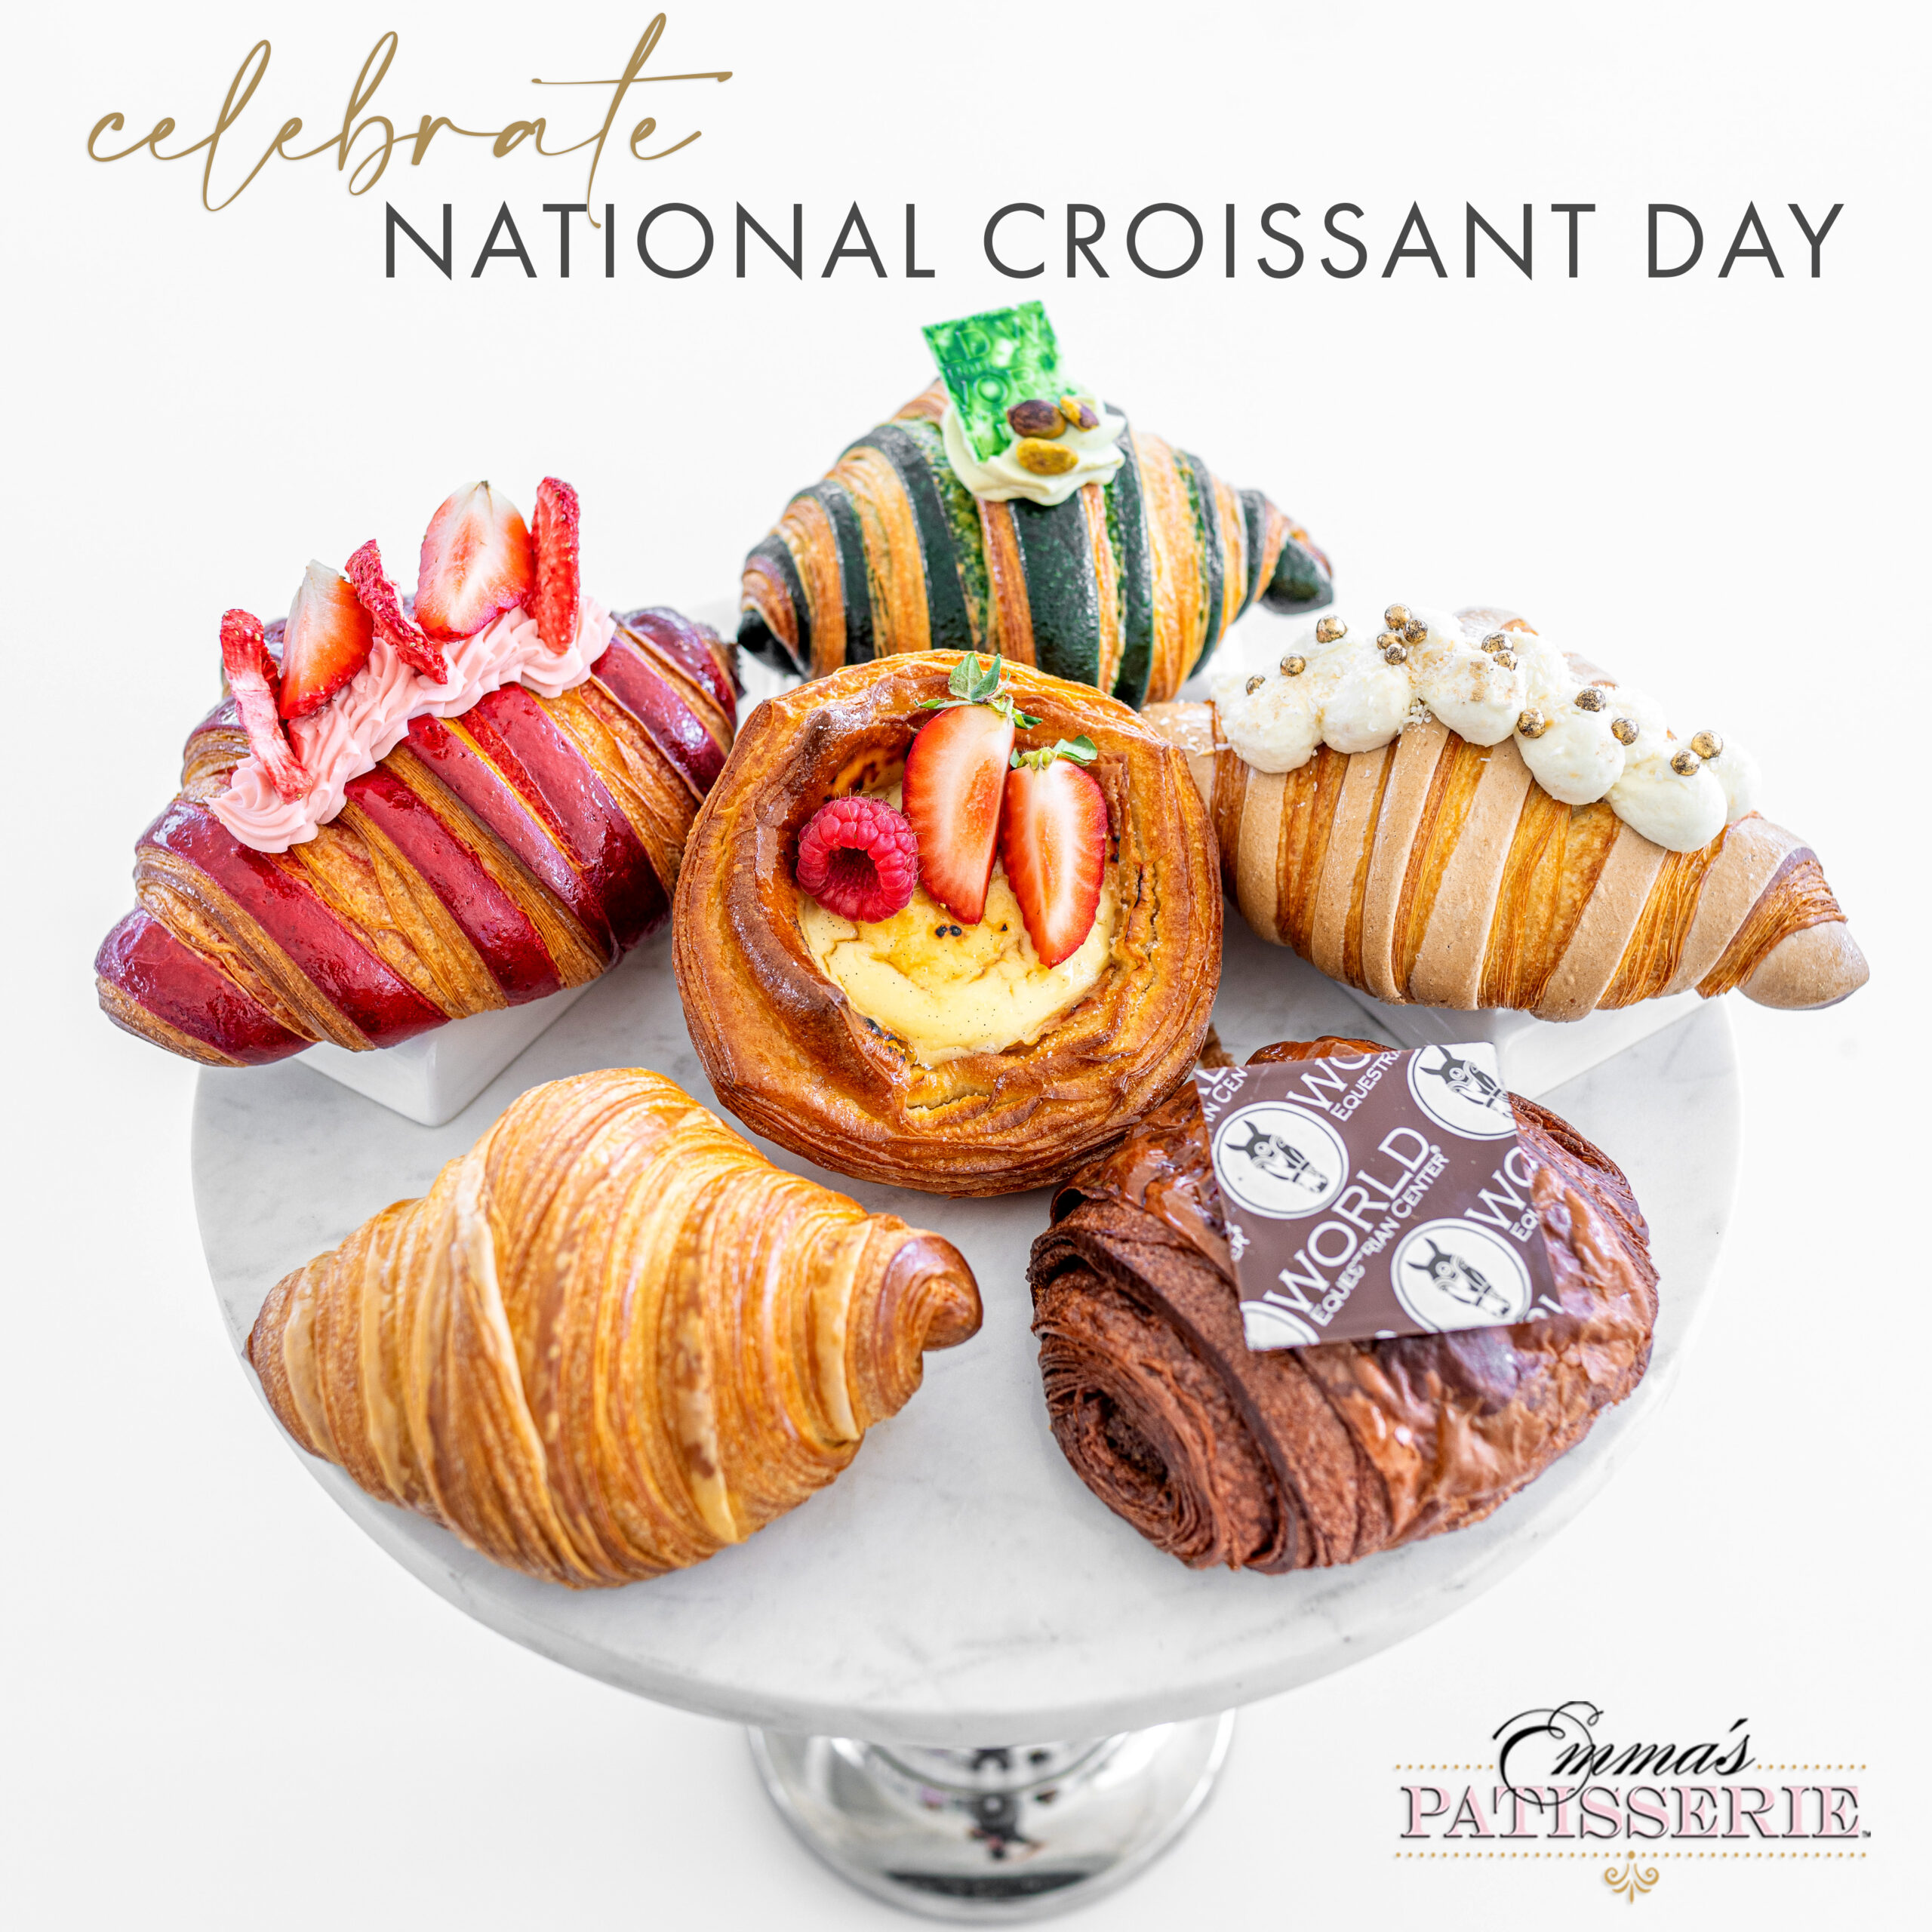 National Croissant Day at Emma's Patisserie World Equestrian Center